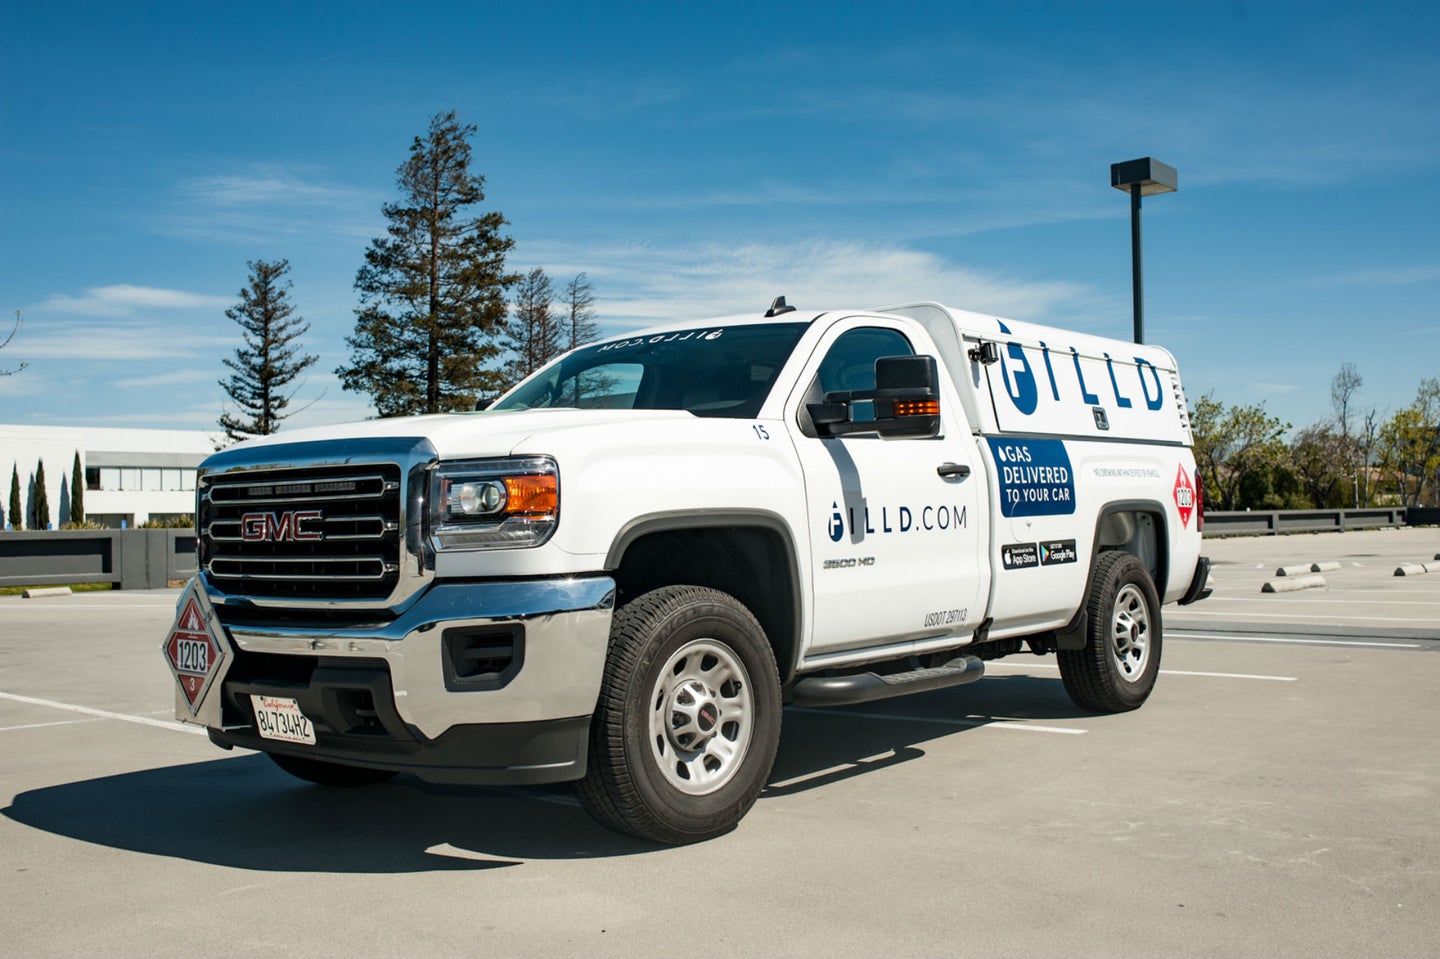 Mobile Fueling Service Filld Gets $15M in Funding Round